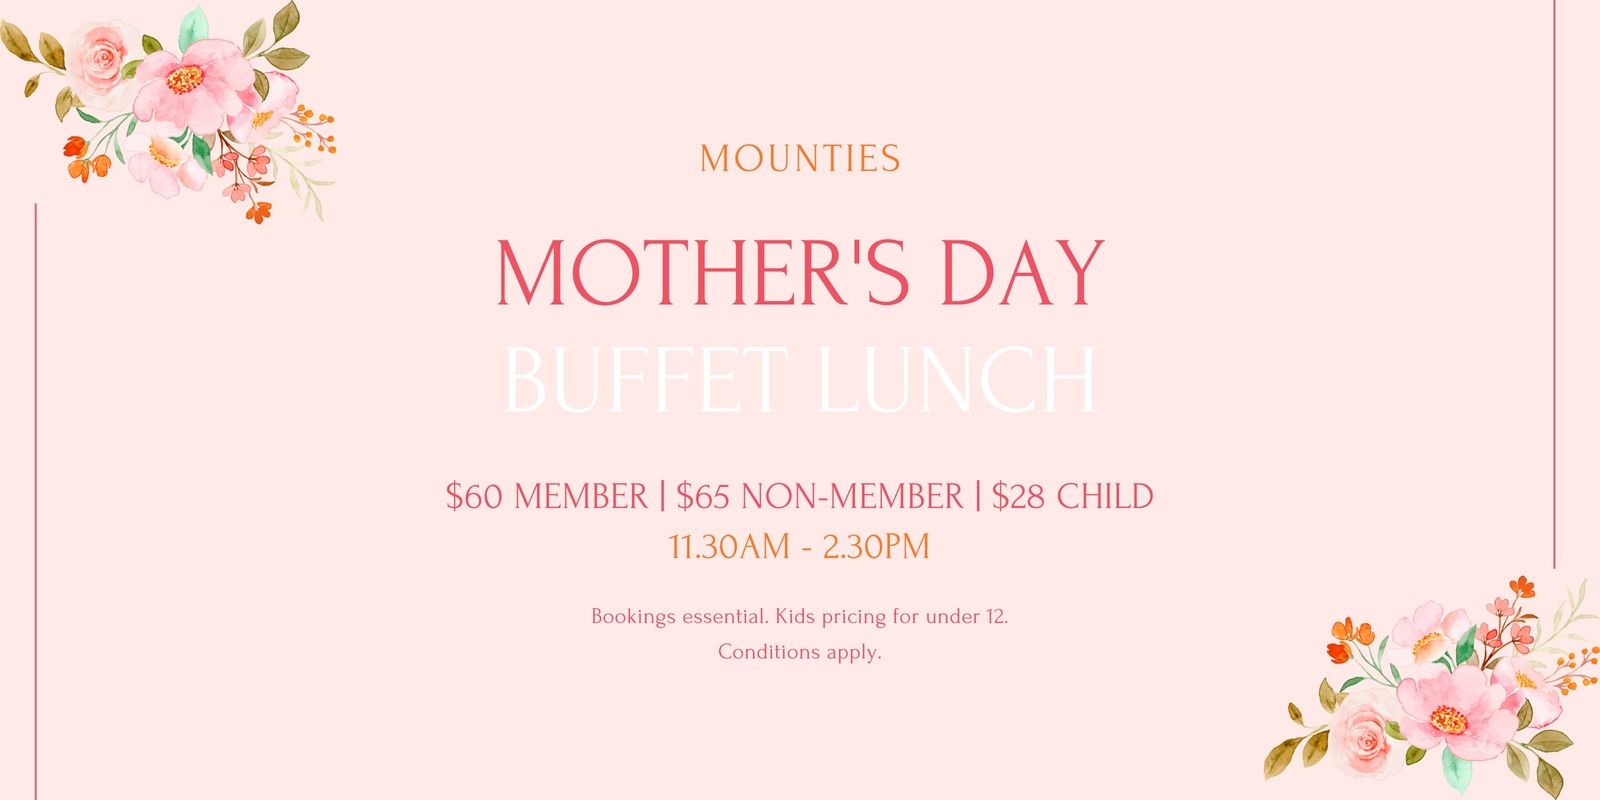 Banner image for Mother's Day Buffet Lunch - Mounties